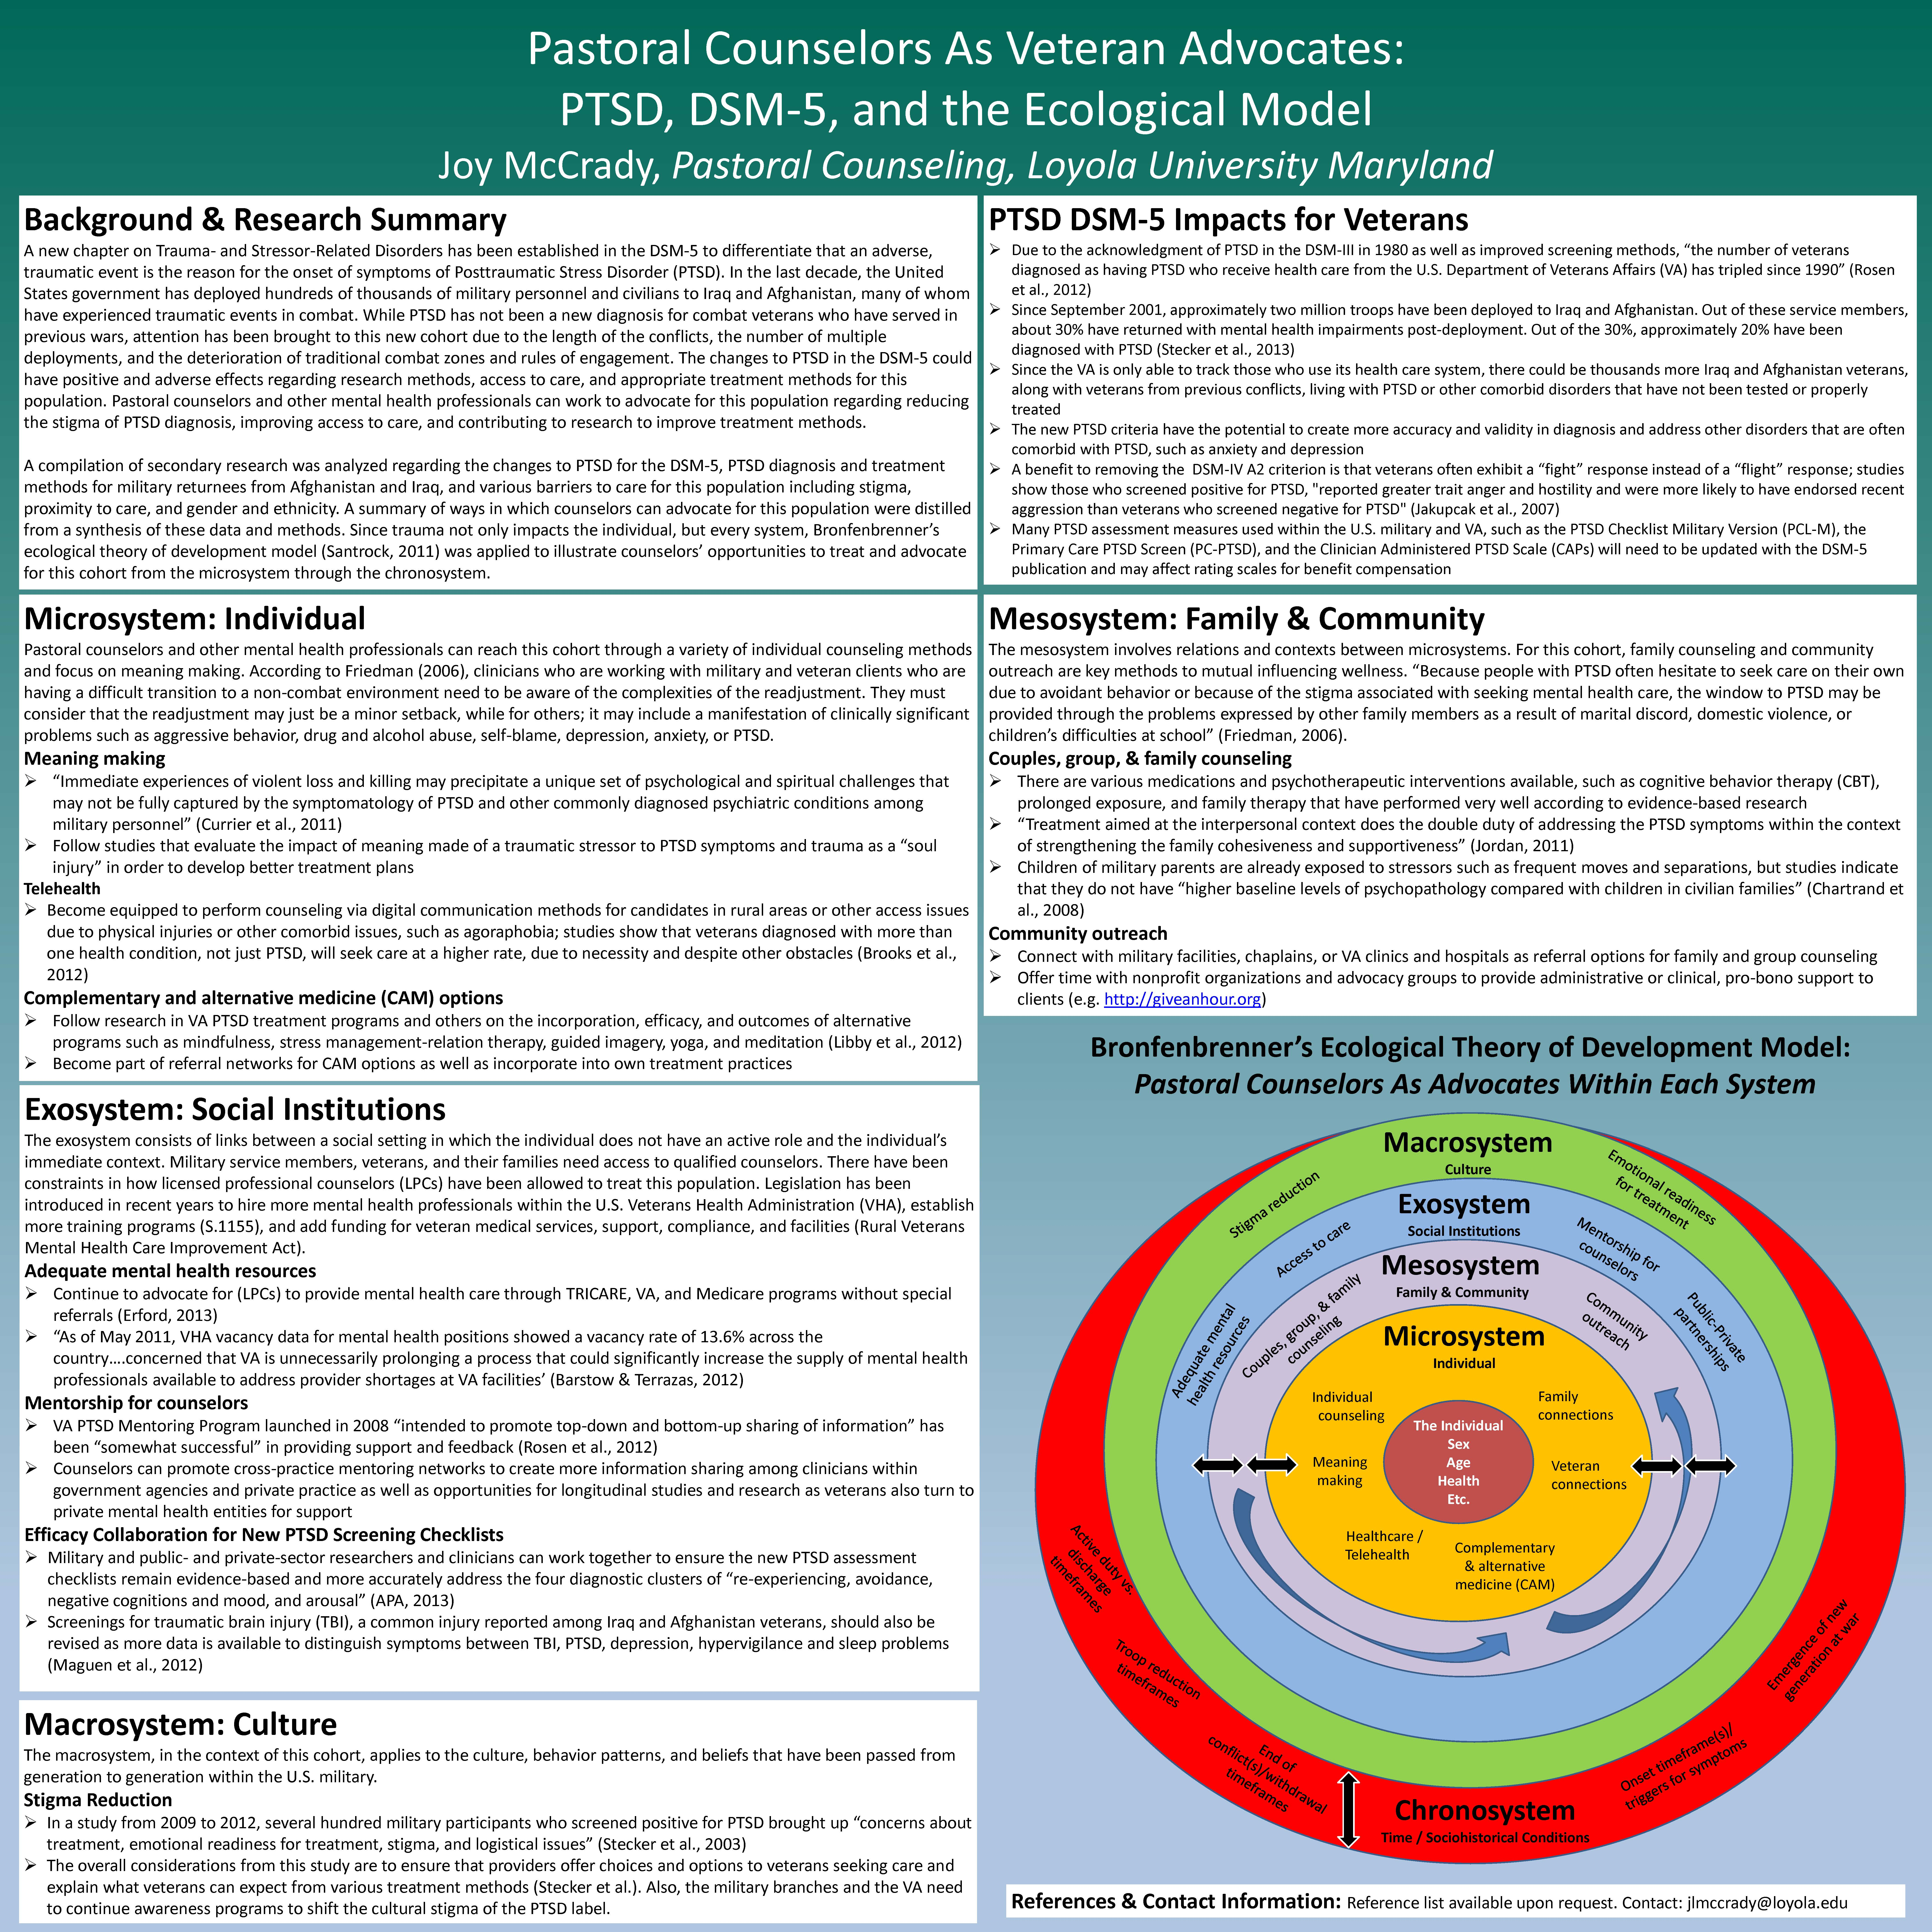 poster image: 'Pastoral Counselors As Veteran Advocates: PTSD, DSM-5, and the Ecological Model'